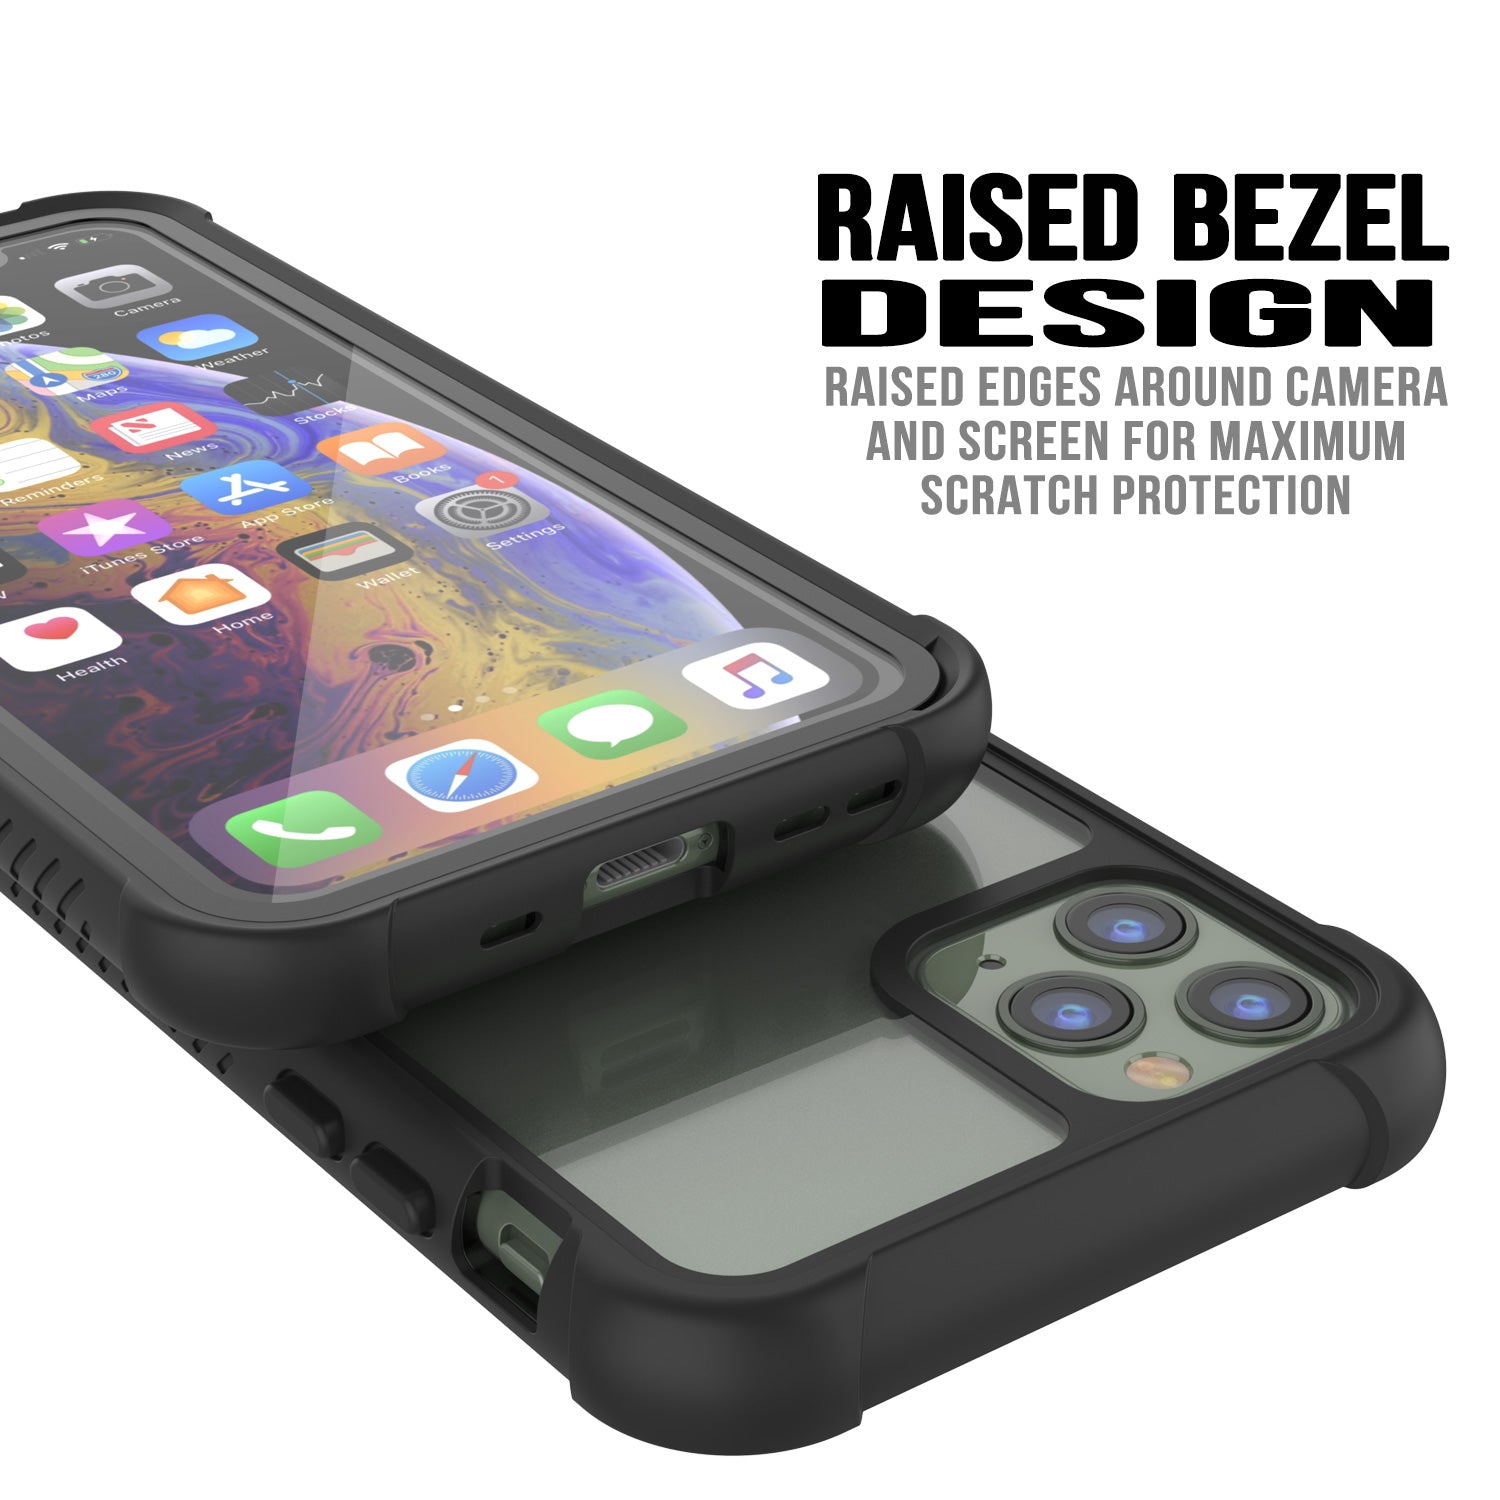 PunkCase iPhone 11 Pro Case, [Spartan Series] Clear Rugged Heavy Duty Cover W/Built in Screen Protector [Black]